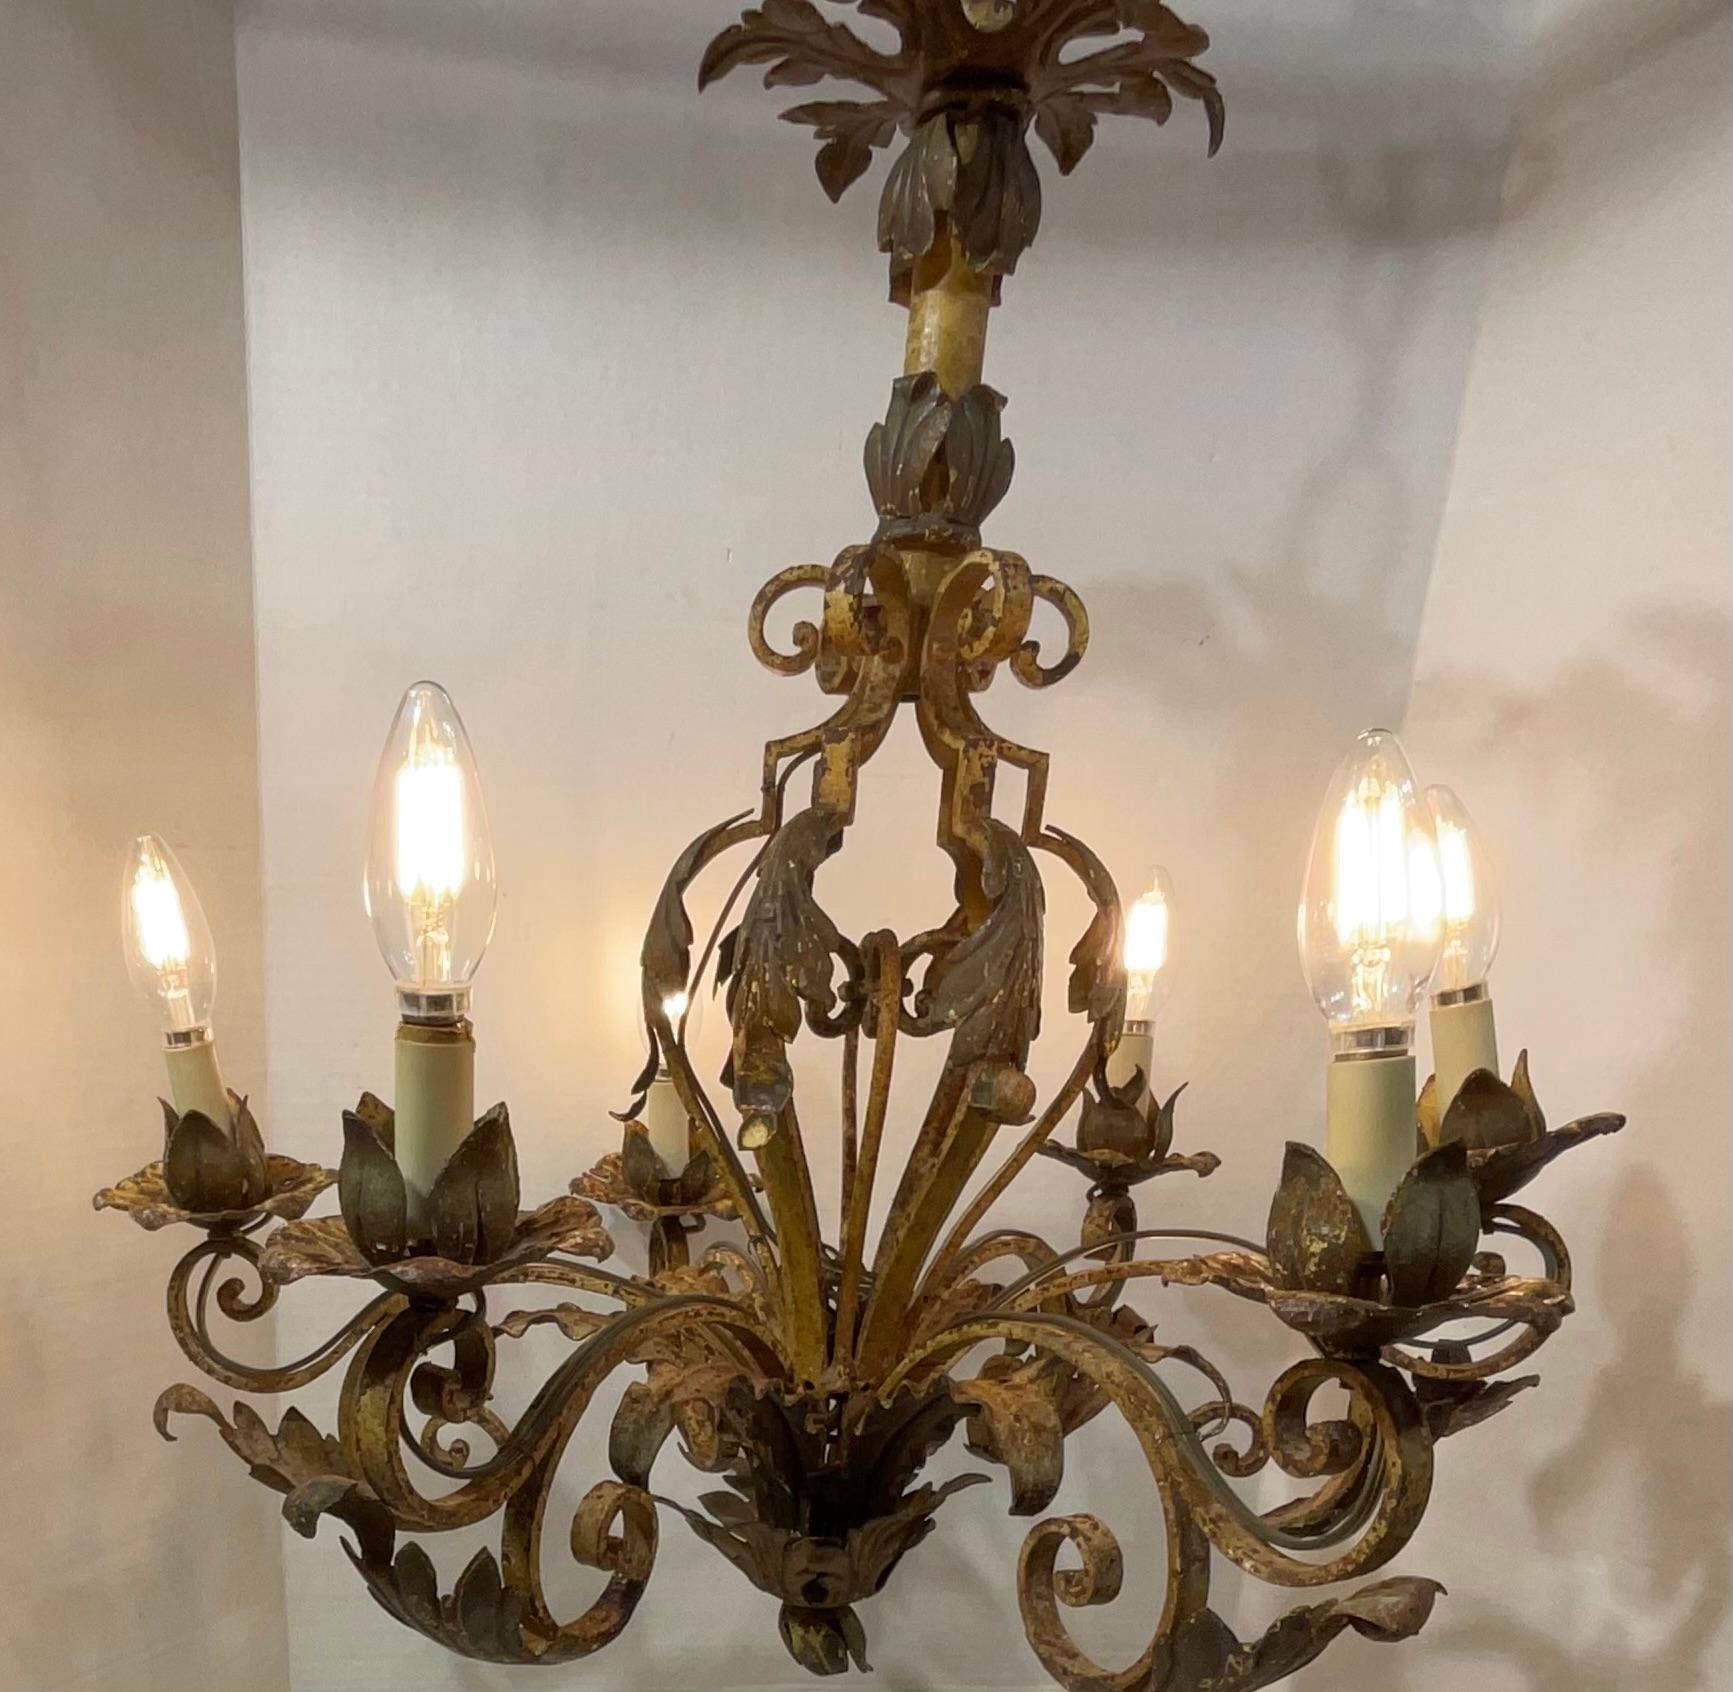 Ornate Wrought Iron Mizner Style Chandelier In Good Condition For Sale In Delray Beach, FL